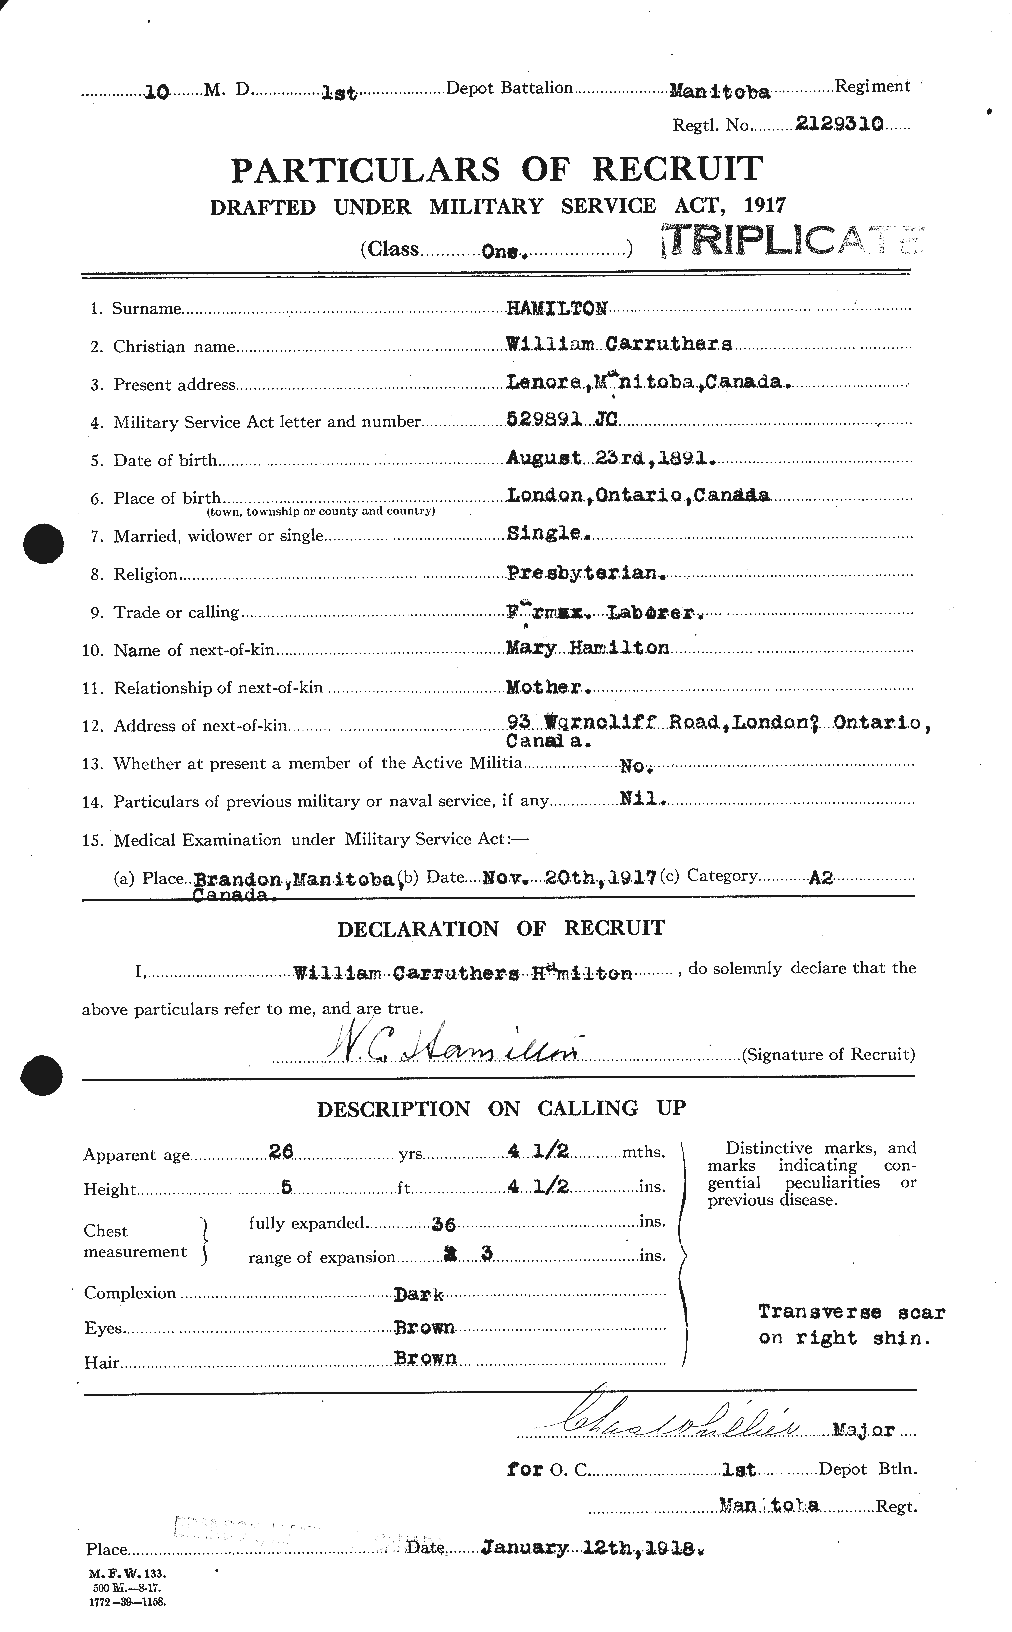 Personnel Records of the First World War - CEF 374877a